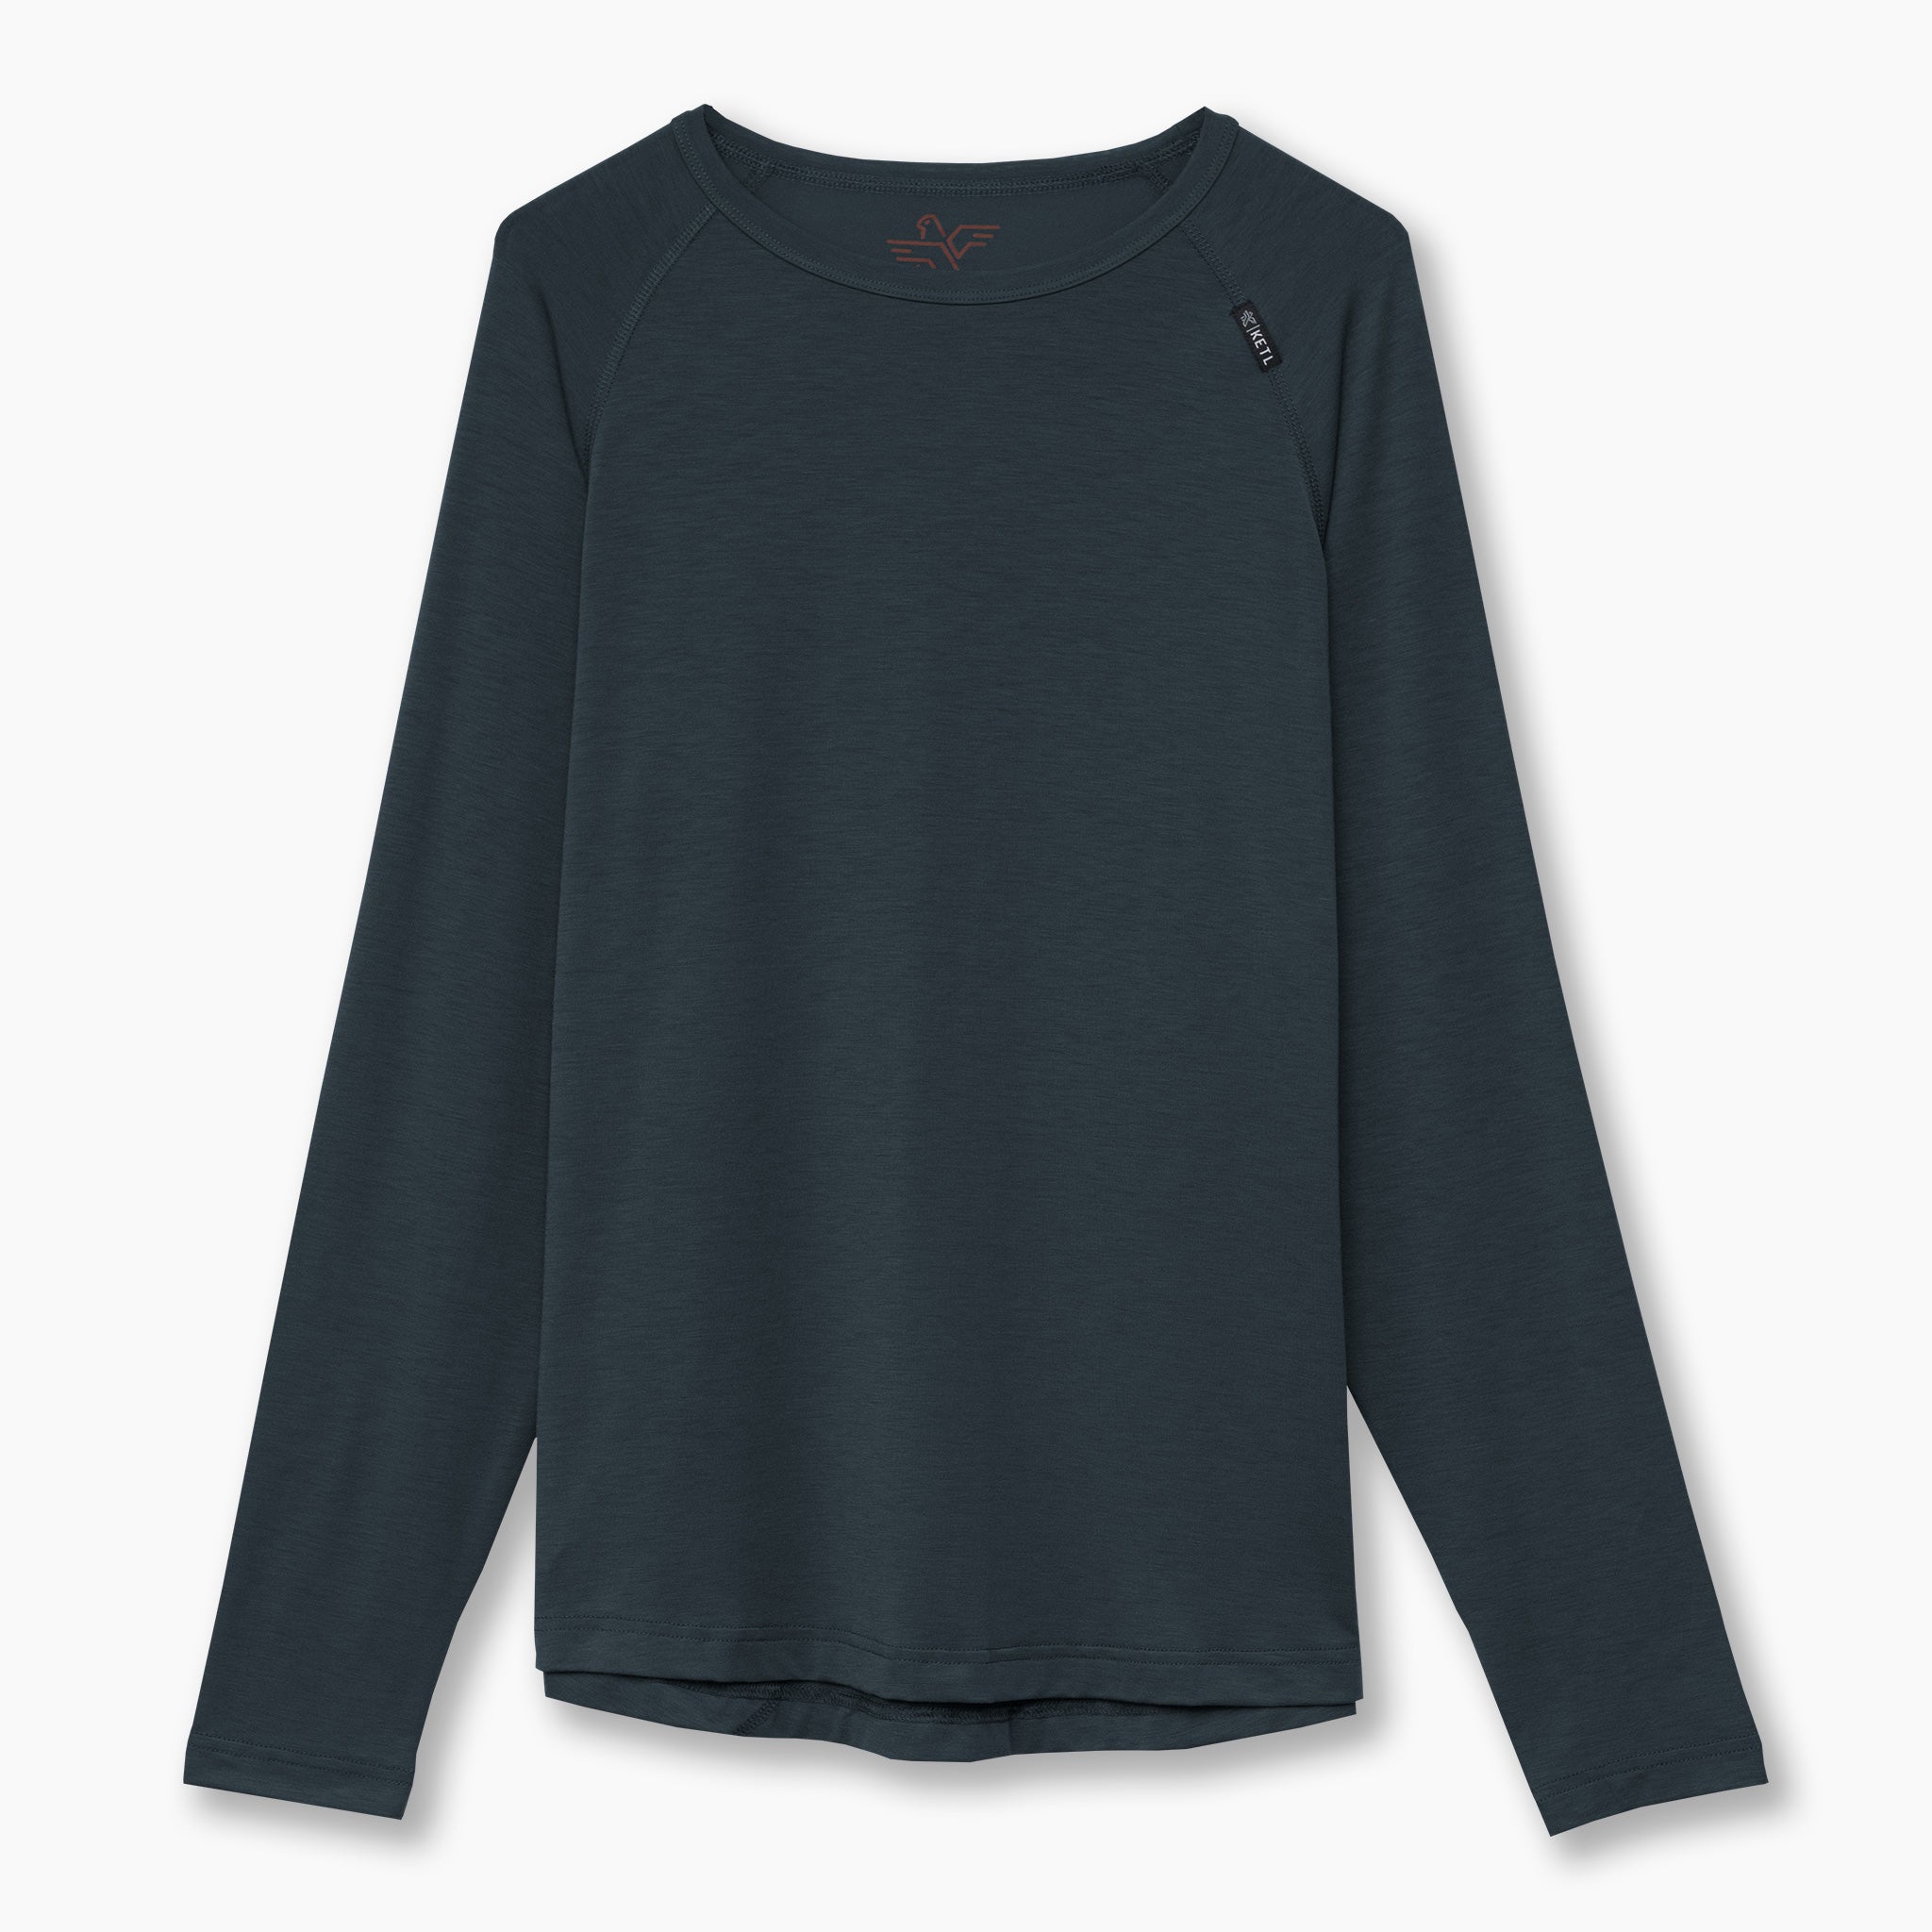 Departed Featherweight Performance Tee Long Sleeve